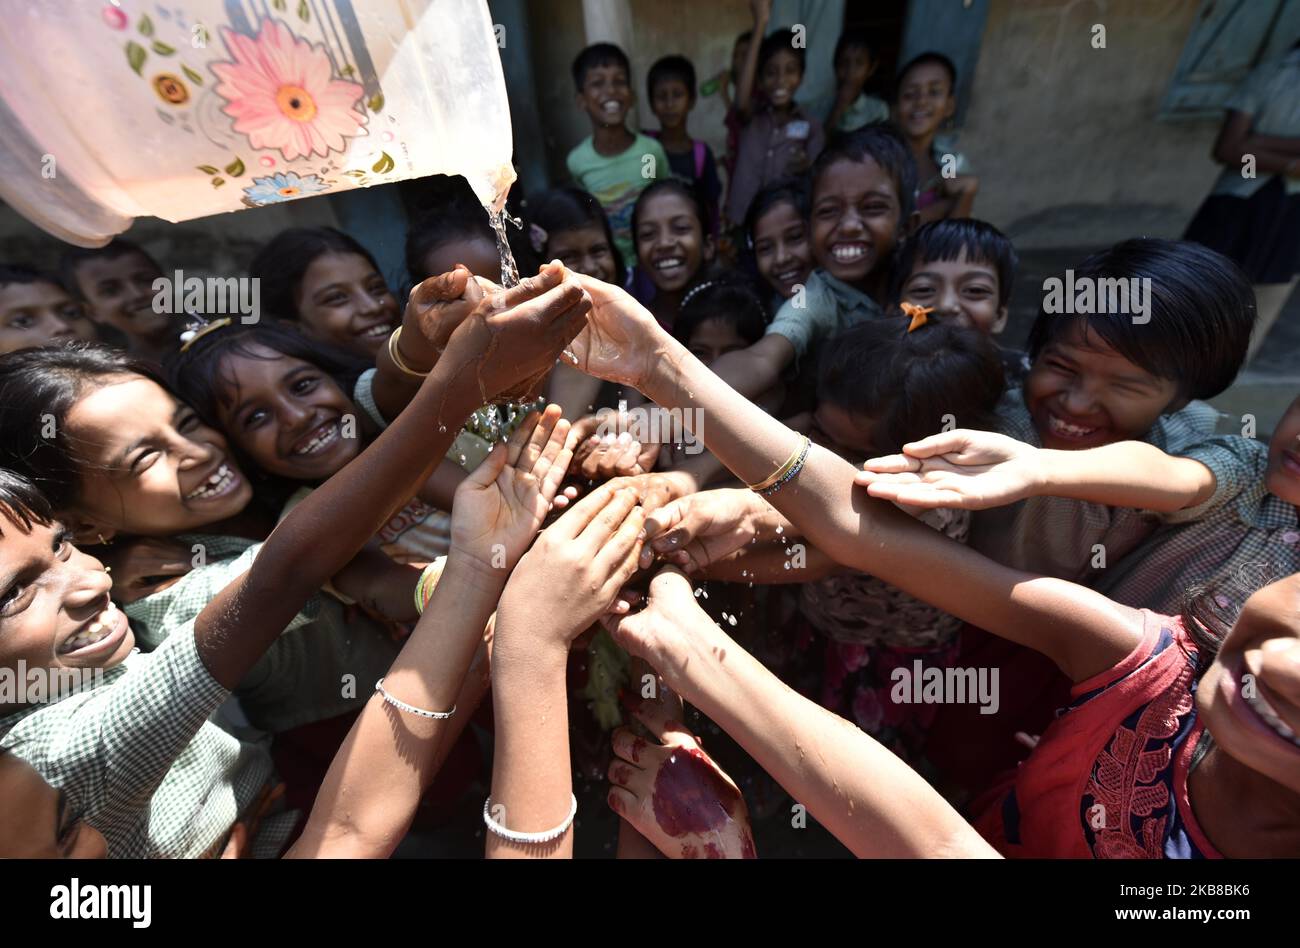 Children wash their hands during an event to mark Global Handwashing Day at a primary school on the outskirt of Guwahati, in Assam, India on Tuesday, October 15, 2019. Global Handwashing Day, celebrated on October 15 every year, aims to educate children washing hands by using soap before eating and after playtime. (Photo by David Talukdar/NurPhoto) Stock Photo